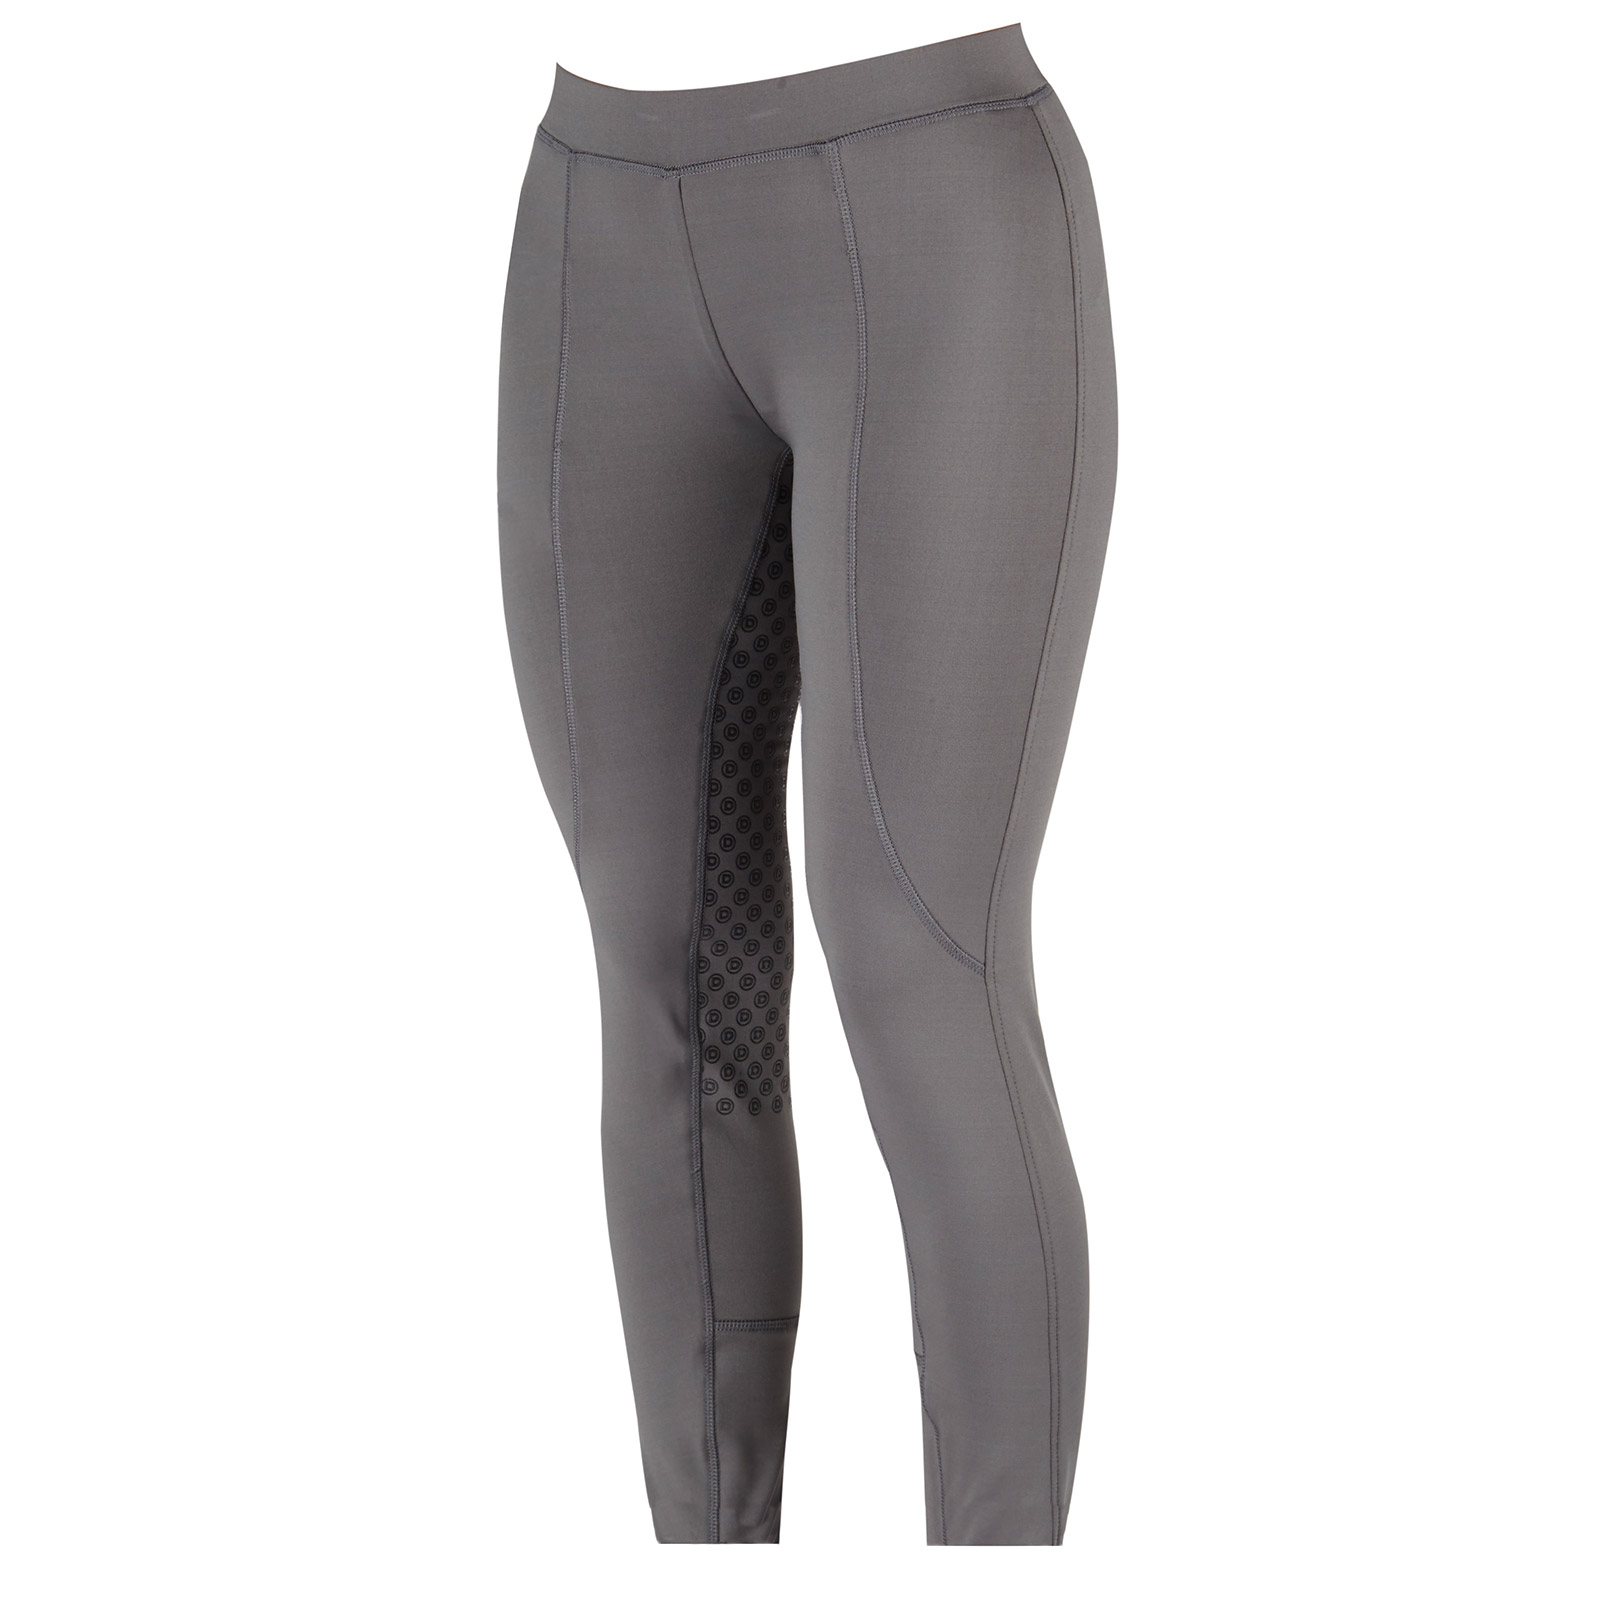 Dublin Performance Cool-It Gel Riding Tights Ladies for Women